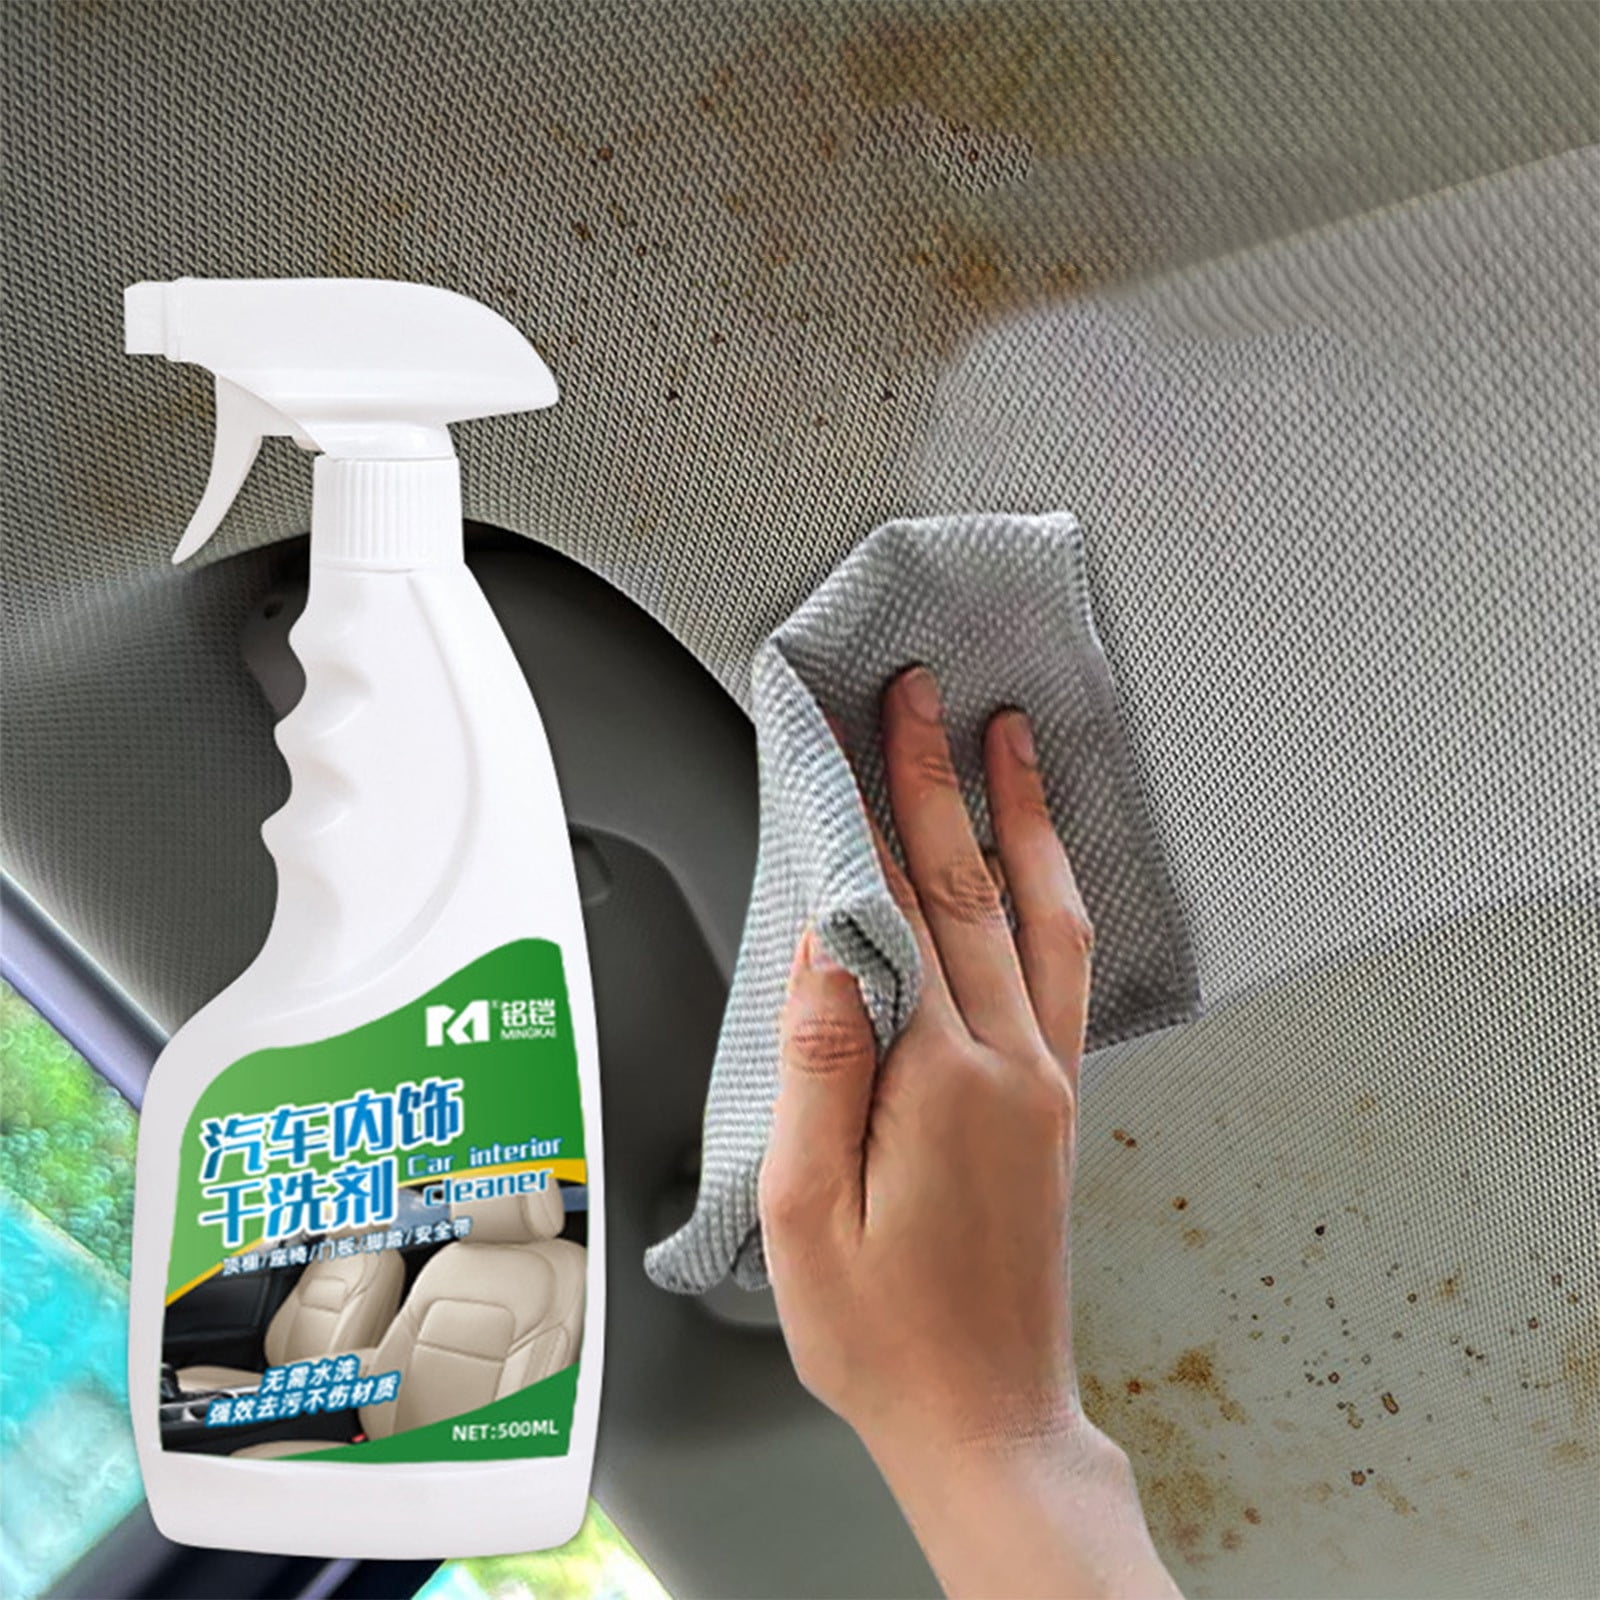 Ouhoe Fabric Cleaning Spray Car Interior Headliner Cleaner Fabric Fleece  Leather Seat Stain Remover